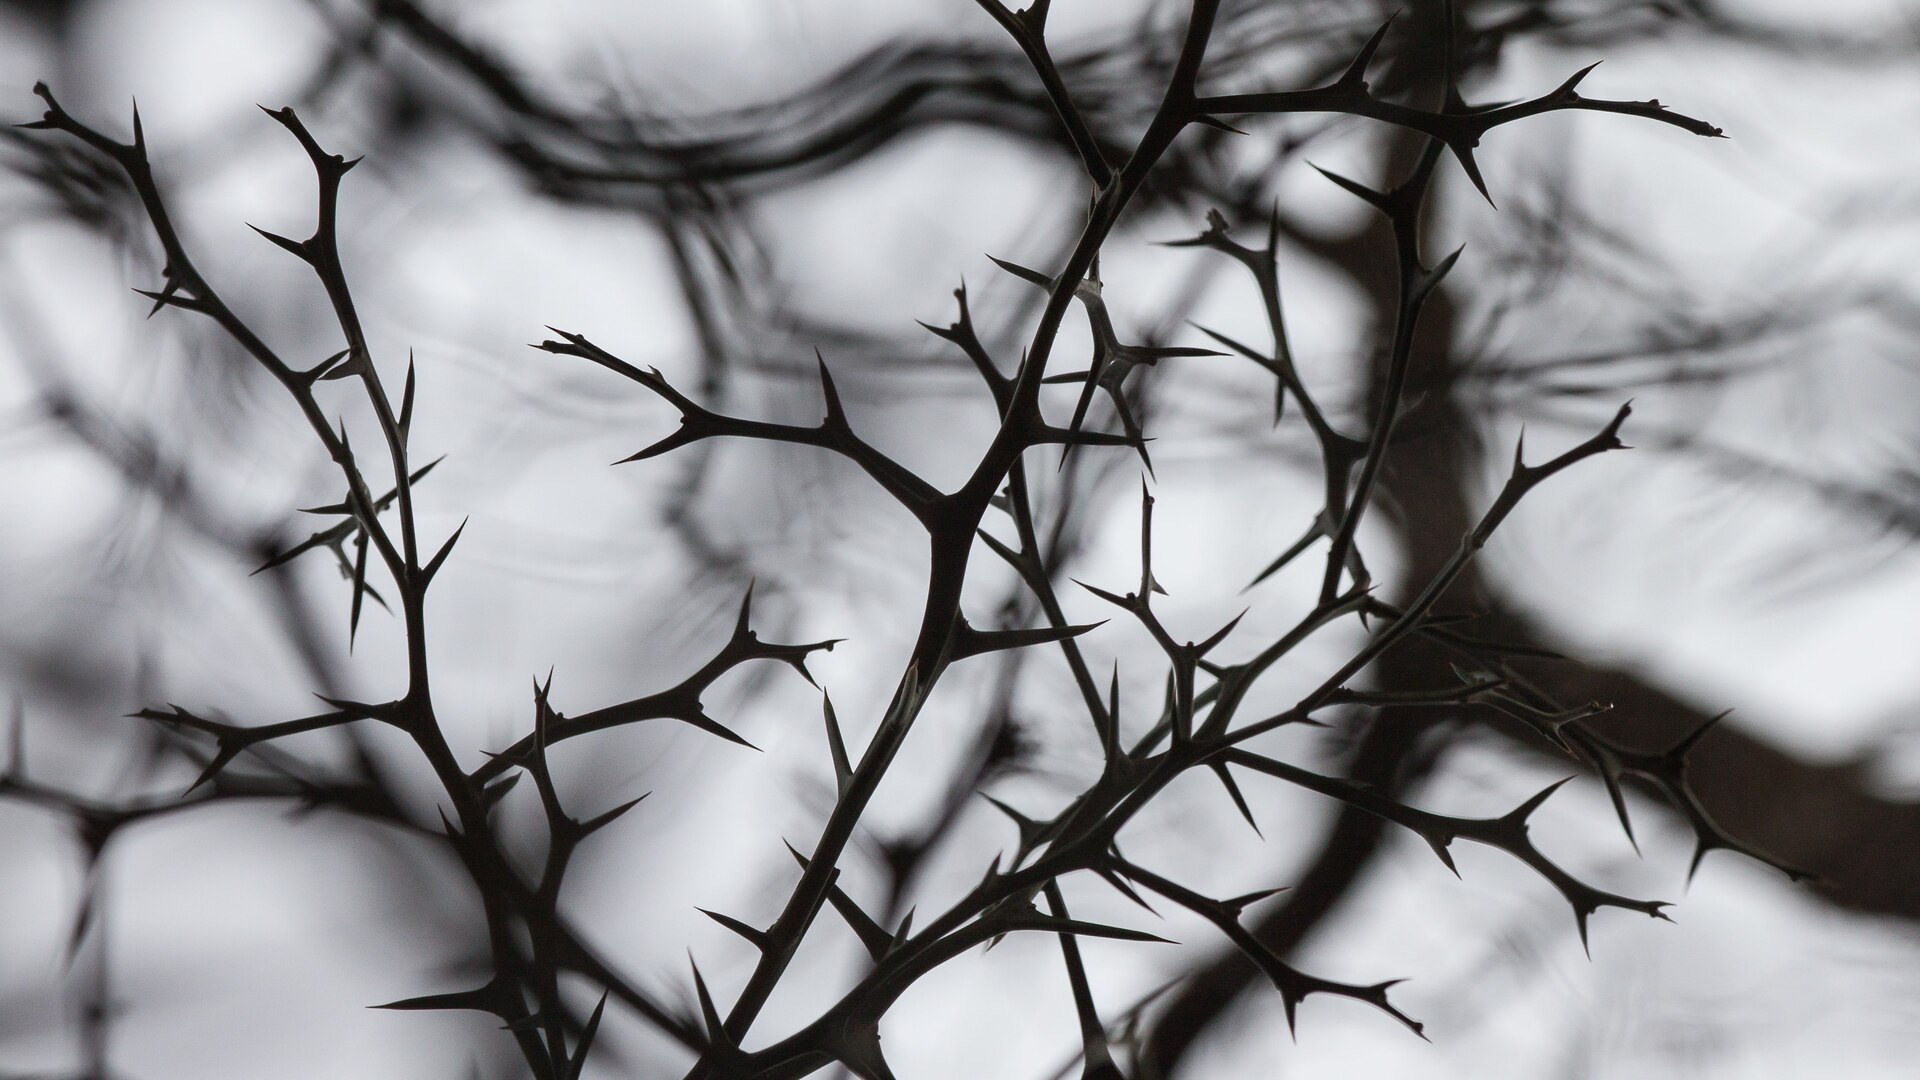 Tree branches with thorns